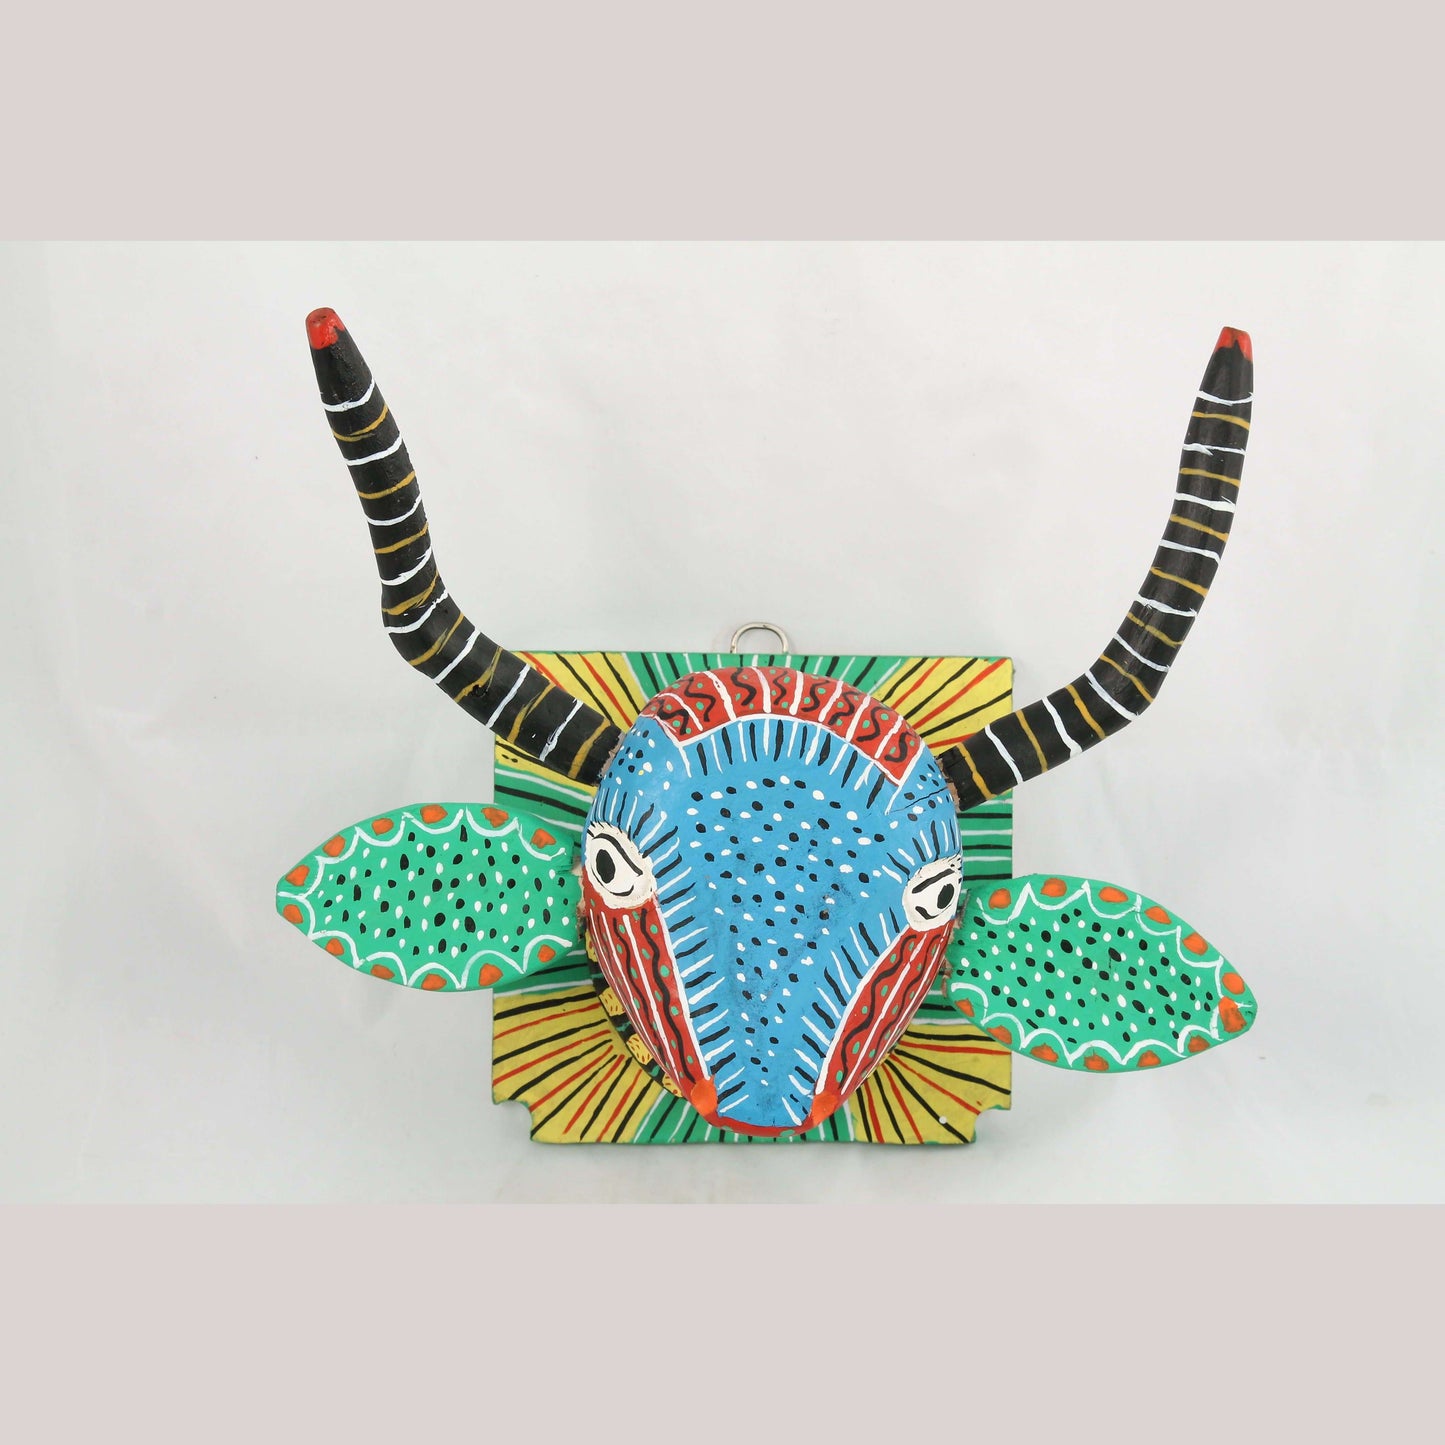 Wood Hanging Deer Hand Crafted/Painted Décor Mexican Folk Art Signed Blu Horns